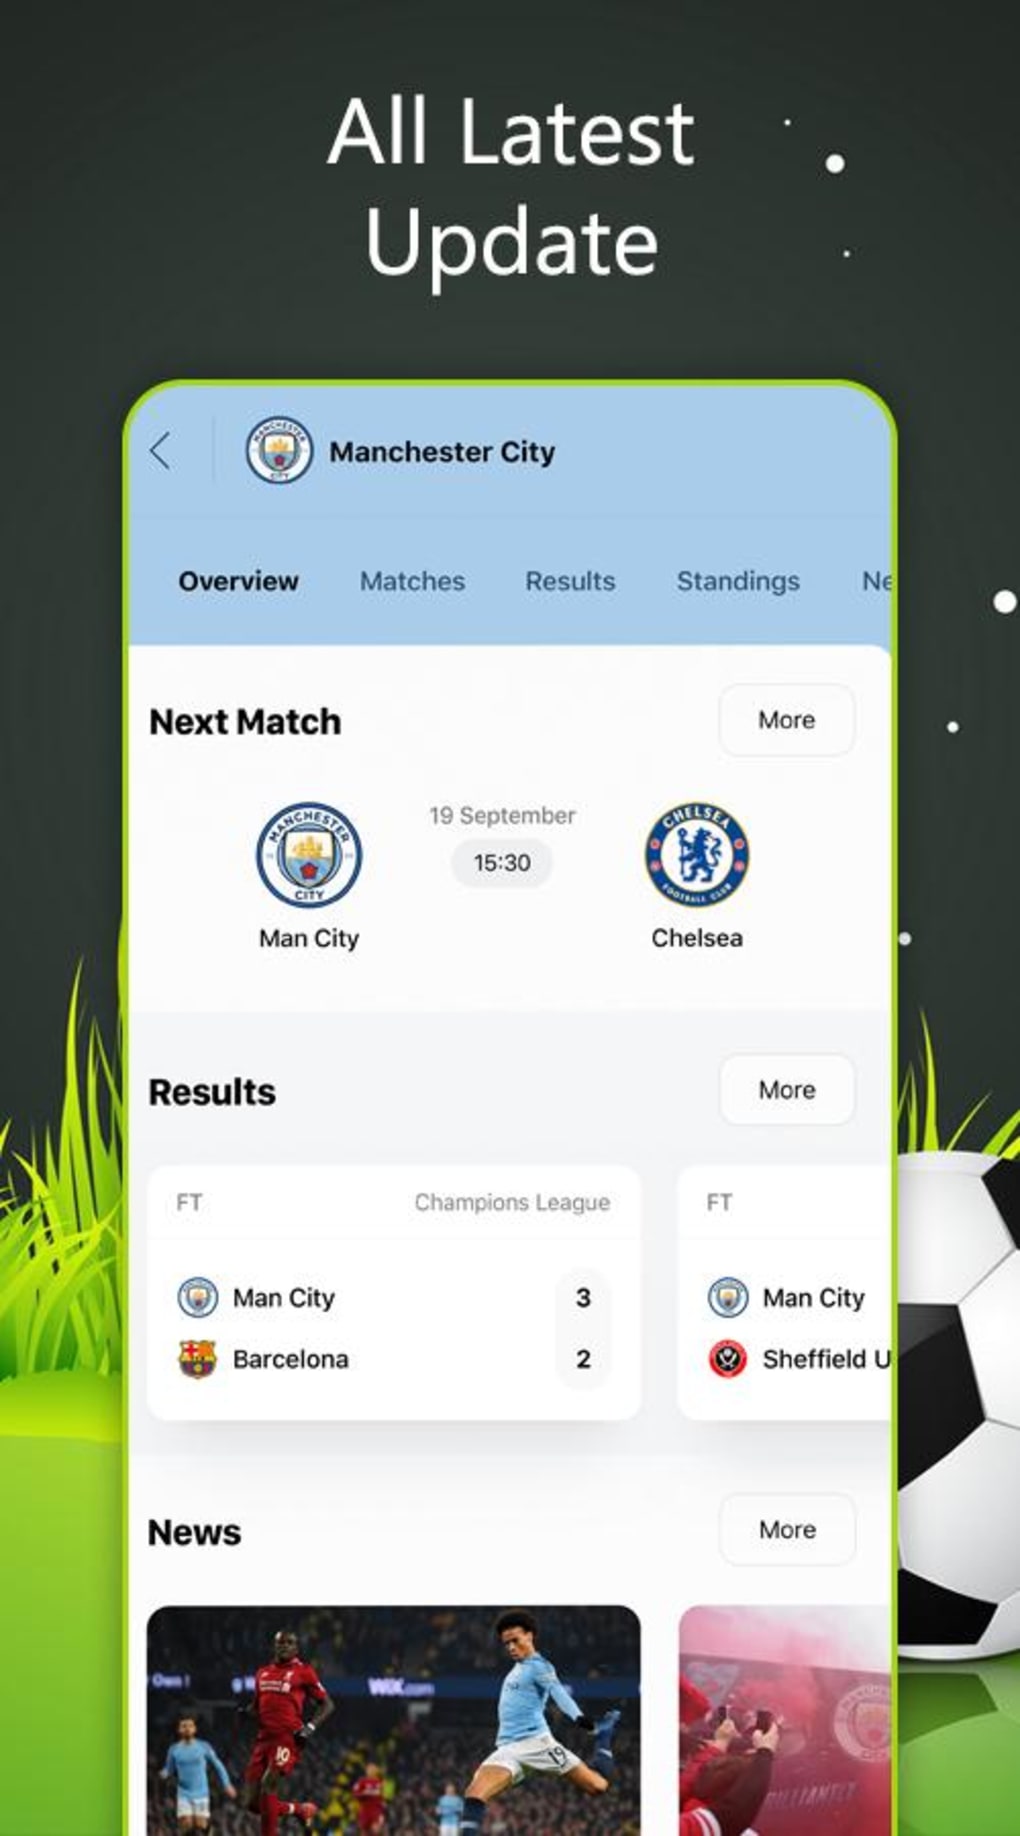 Download Live Football TV Streaming HD APK for Android, Run on PC